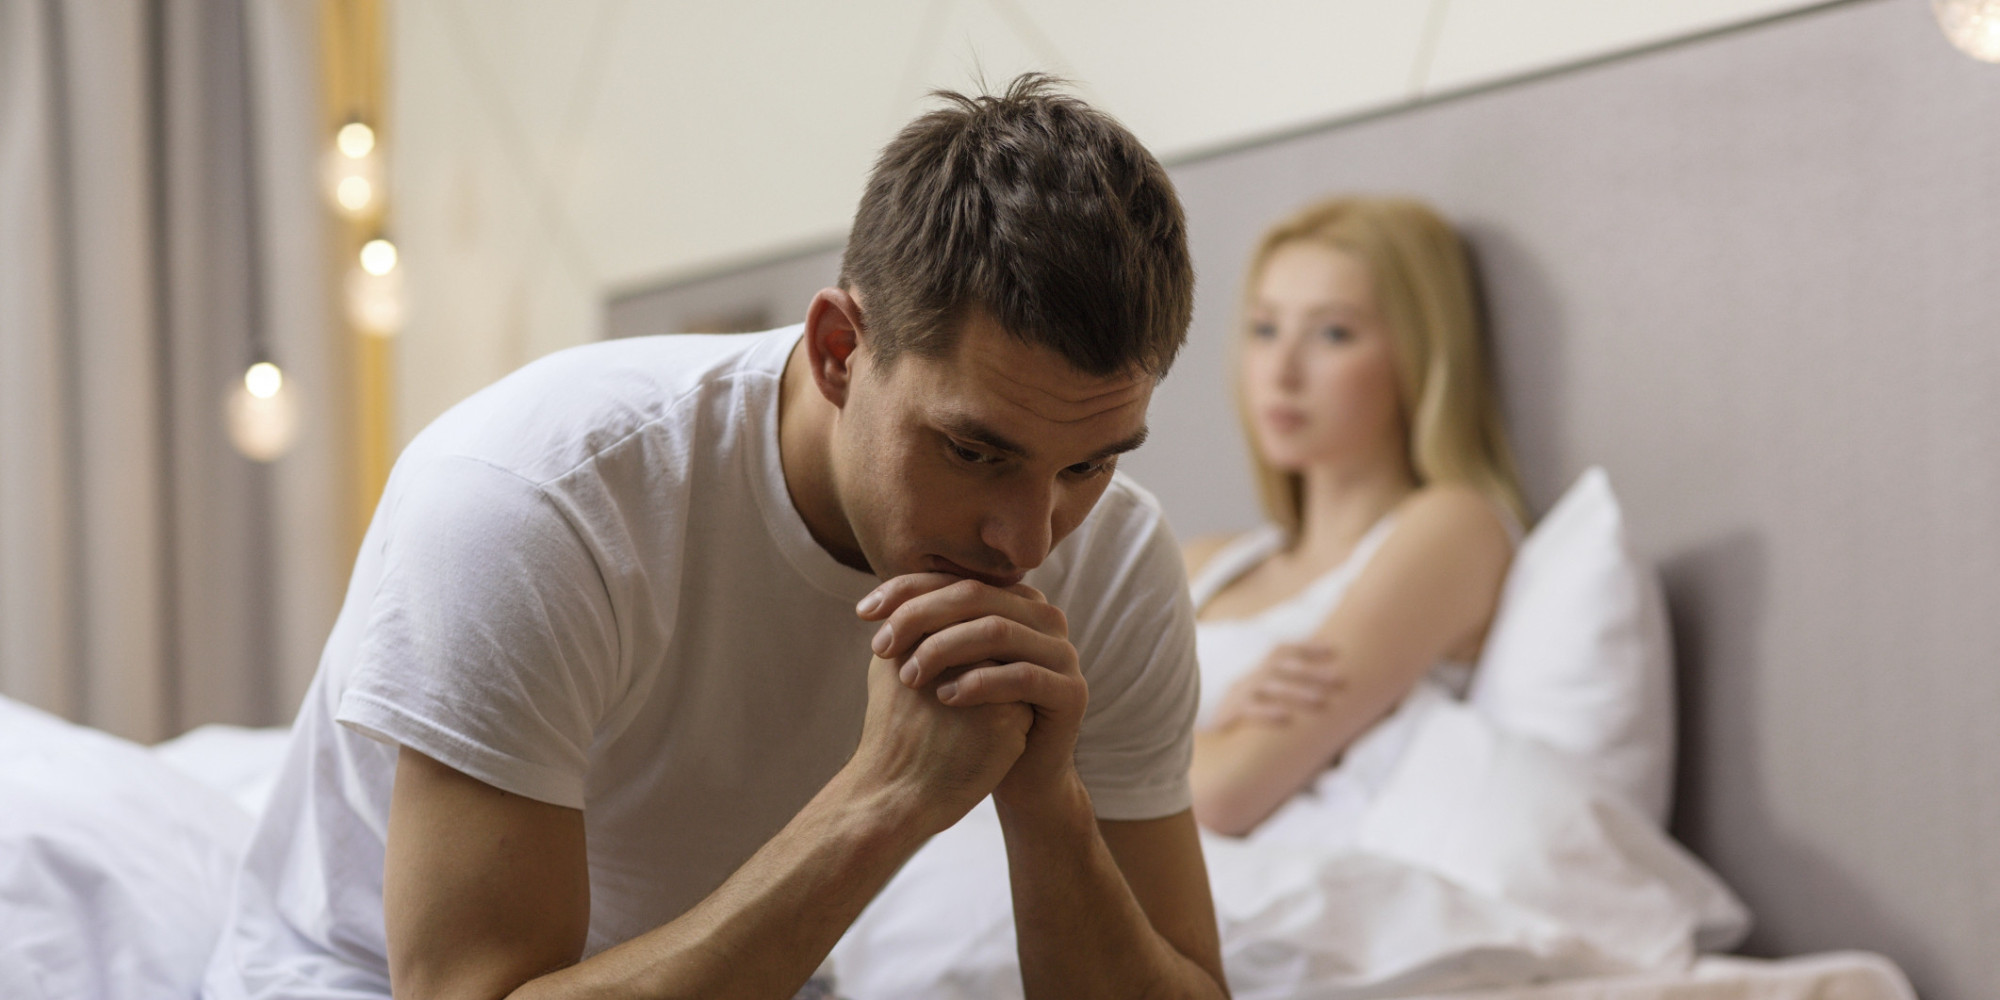 The 5 Quickest Ways to Kill Your Relationship